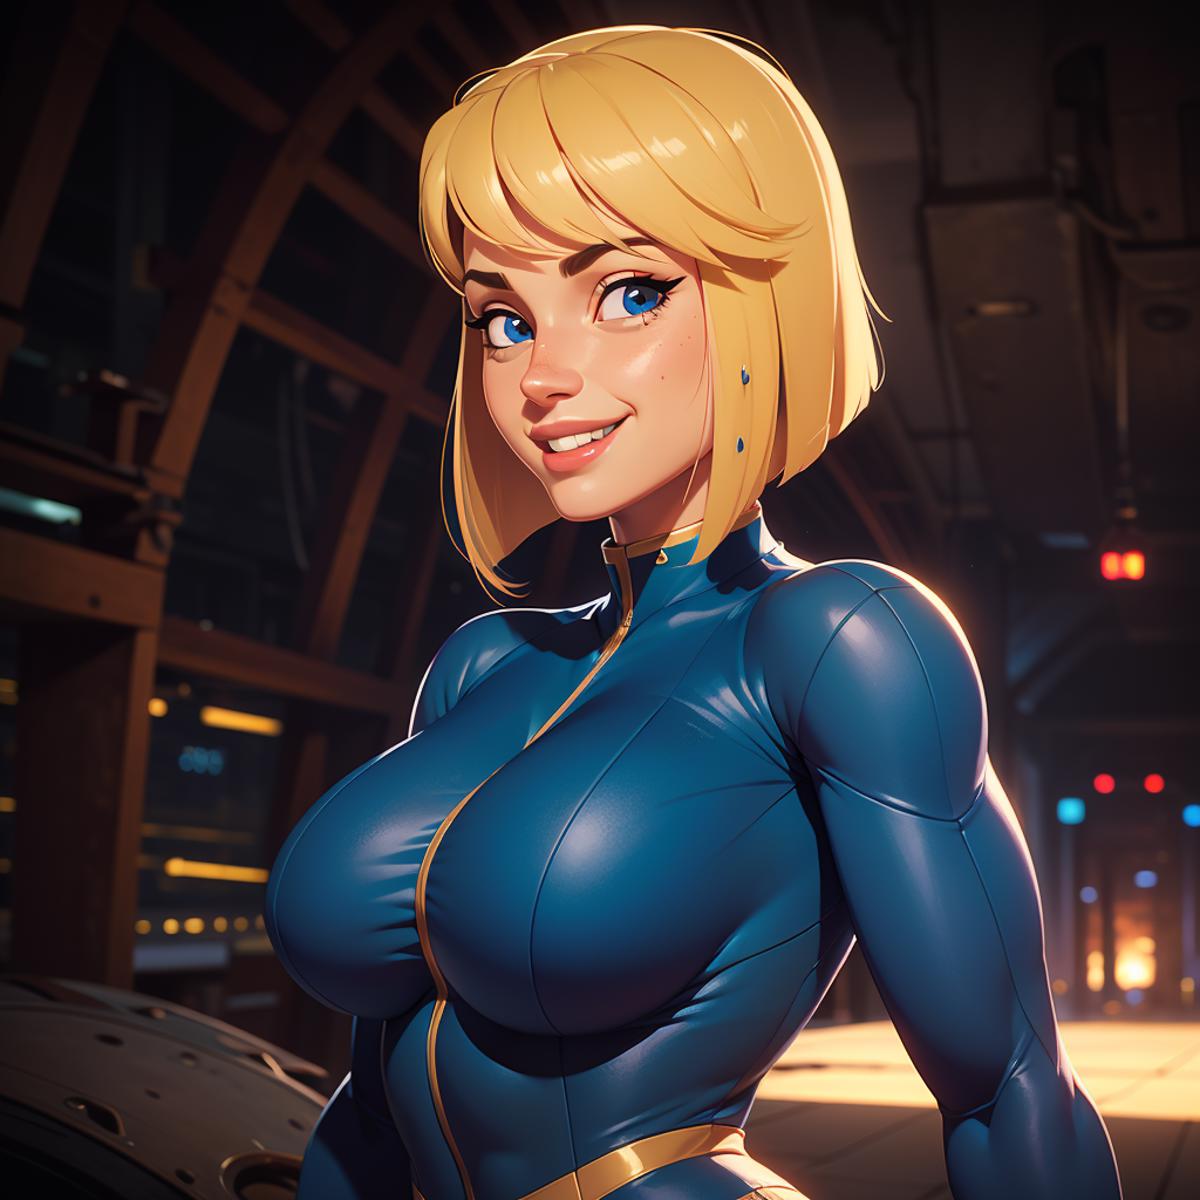 Vault-Girl - Fallout image by infamous__fish